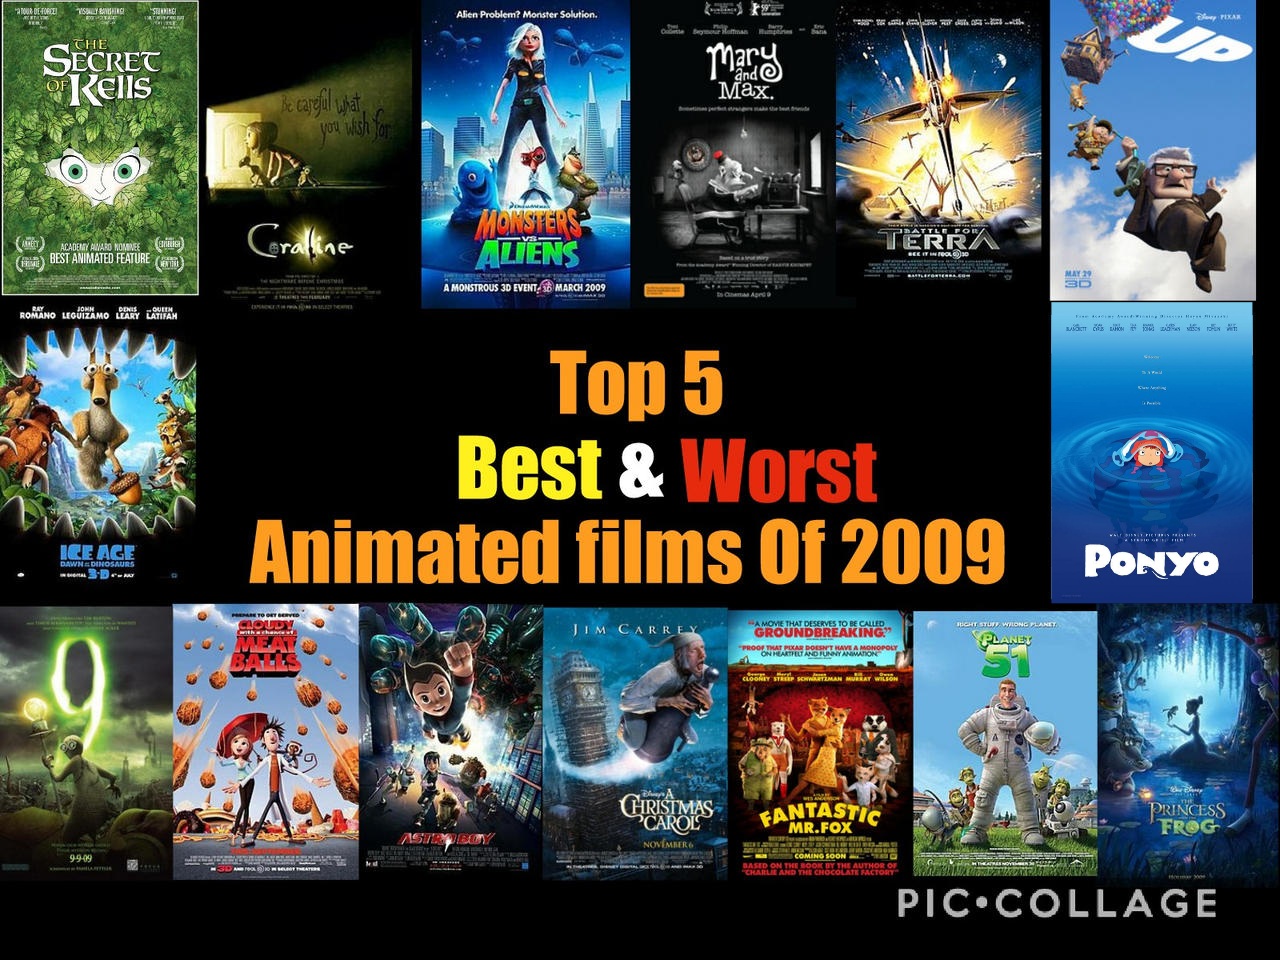 Top 5 BestAWorst Animated Films Of 2009 by Darcy2004 on DeviantArt